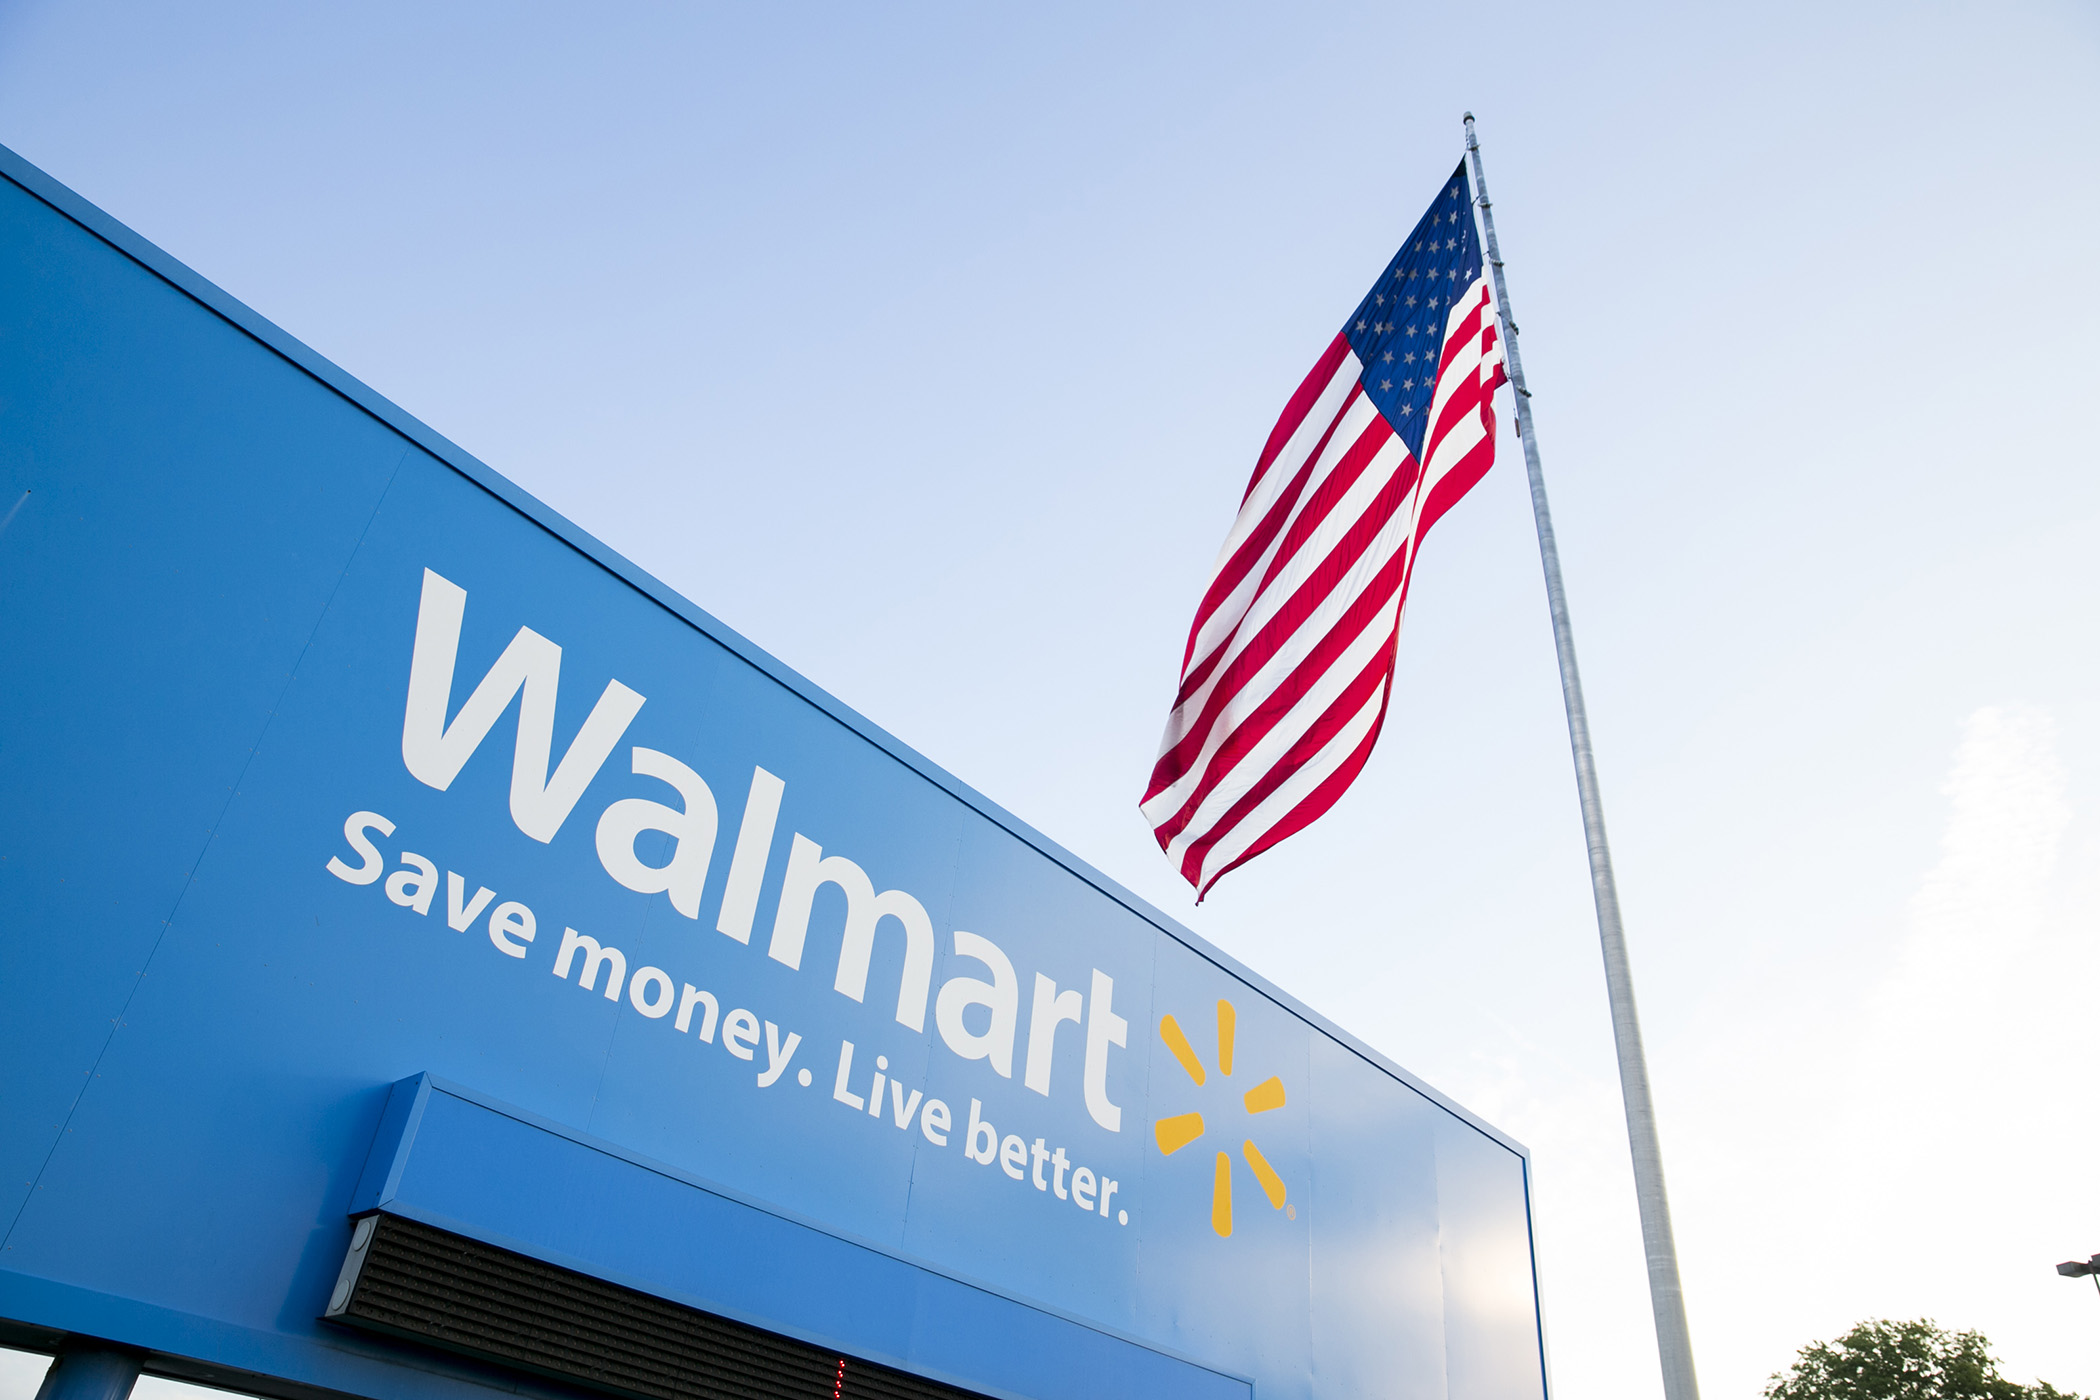 The Net Worth of Walmart - Who is the Next Billionaire in the Walmart Family?